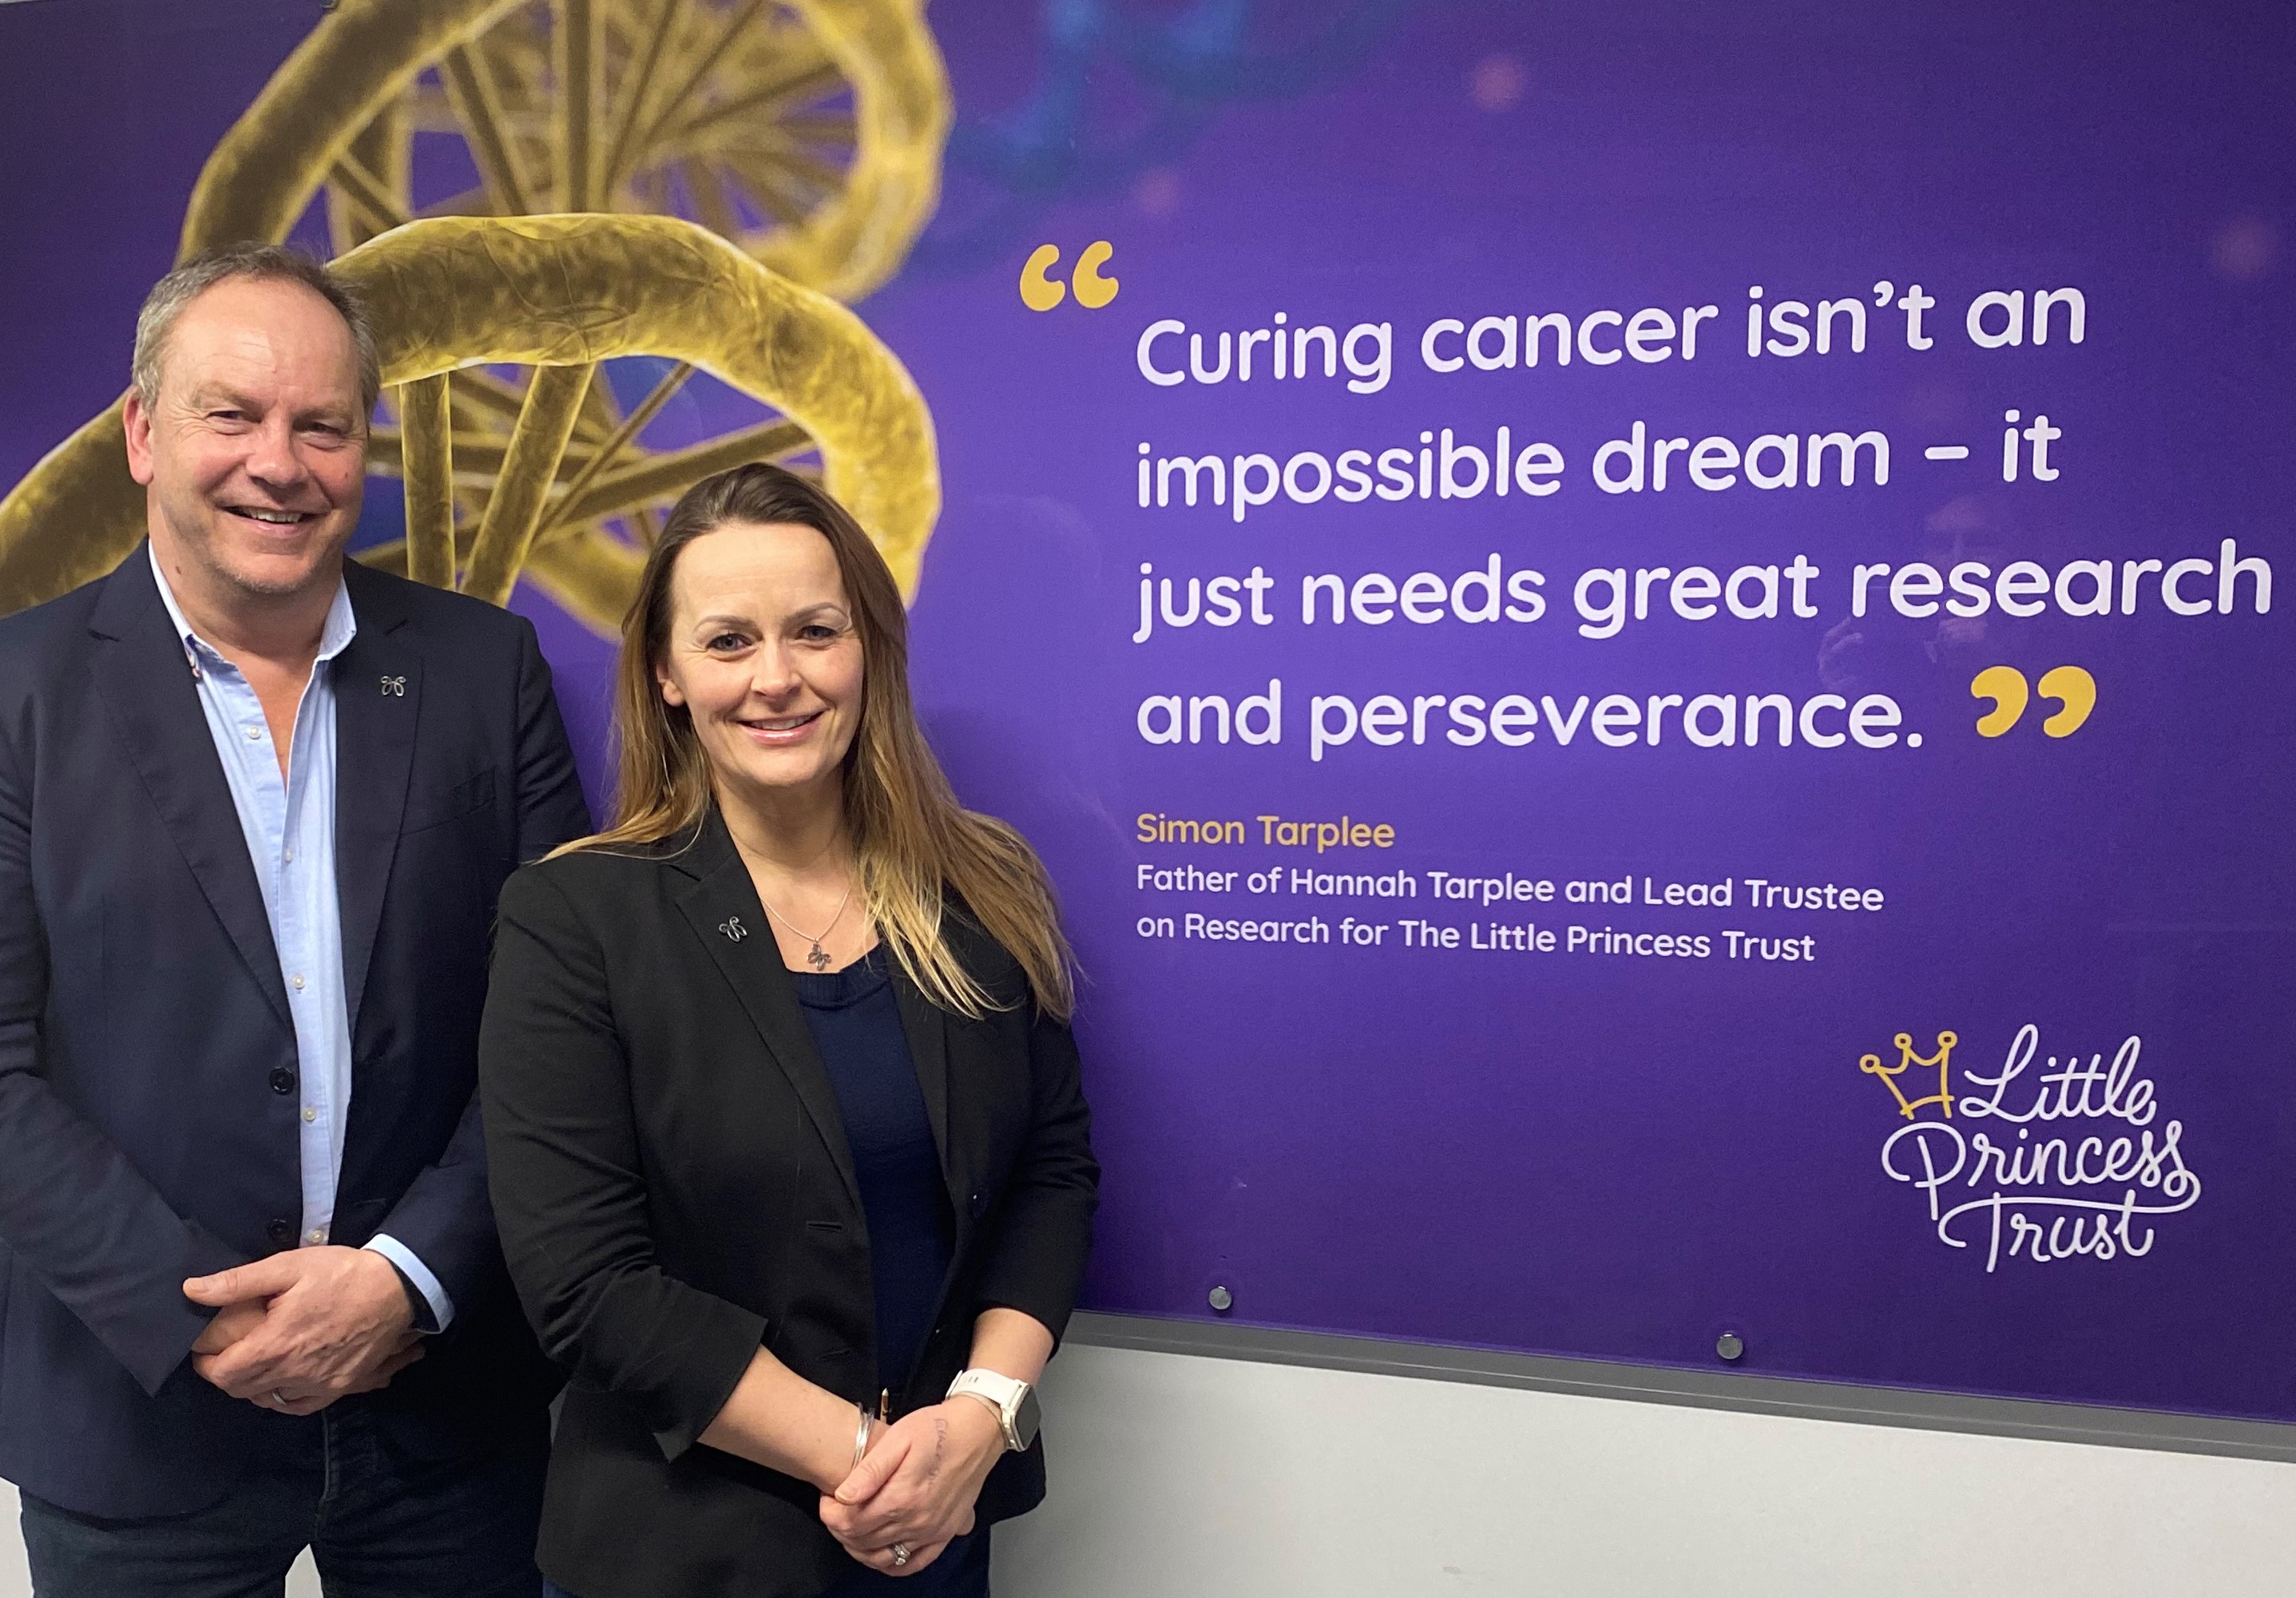 Phil Brace and Wendy Tarplee-Morris, from The Little Princess Trust, are committed to supporting the childhood cancer research community. 